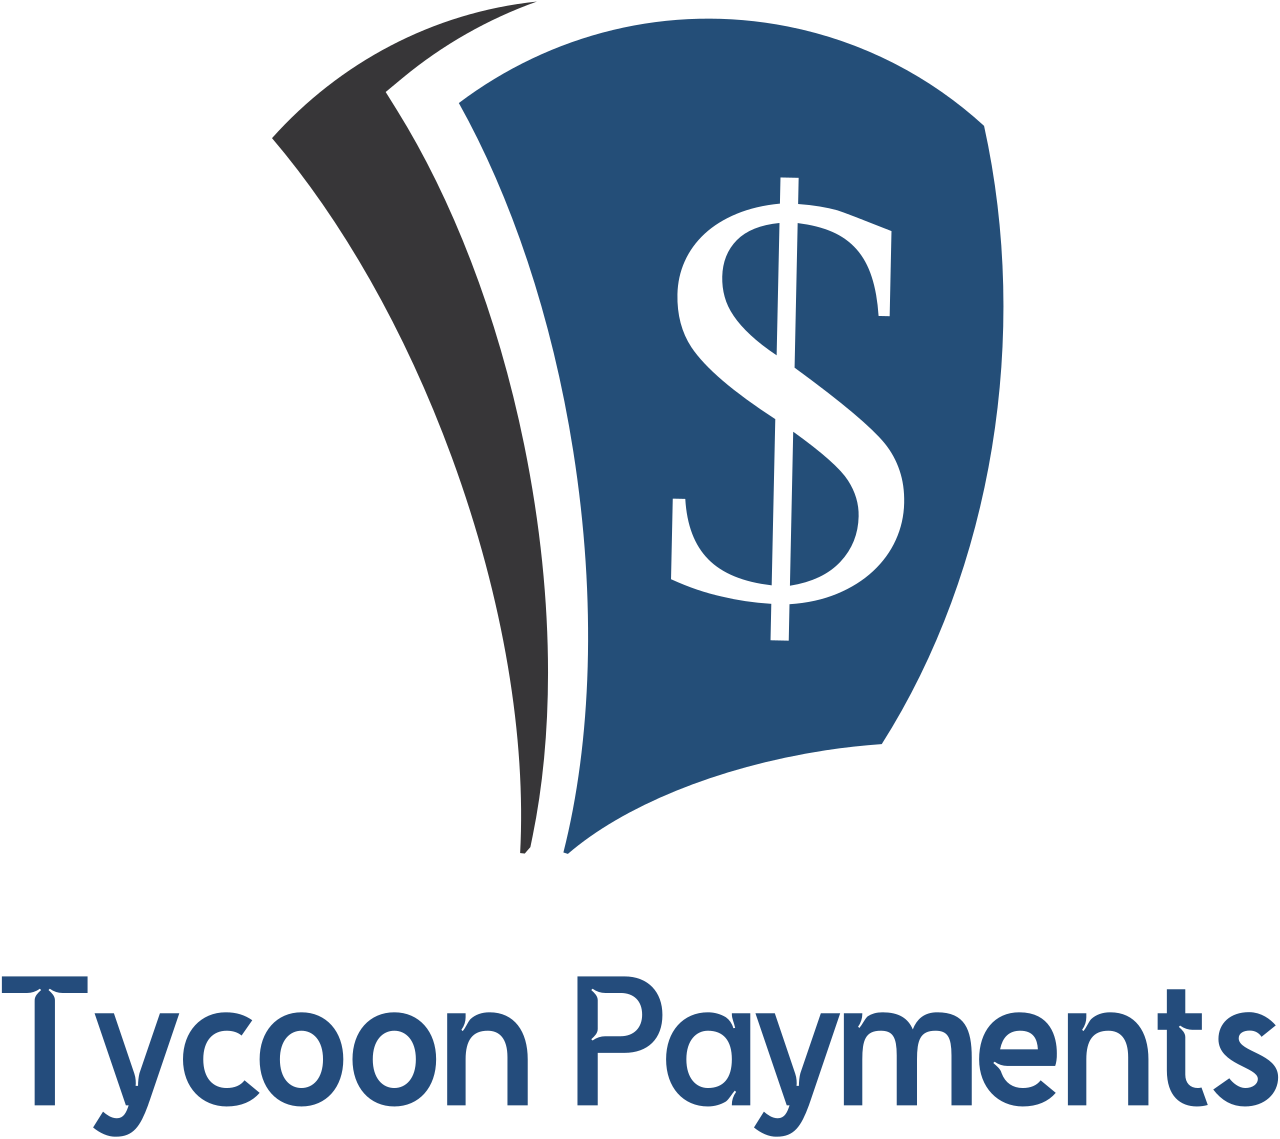 Tycoon Payments's web page